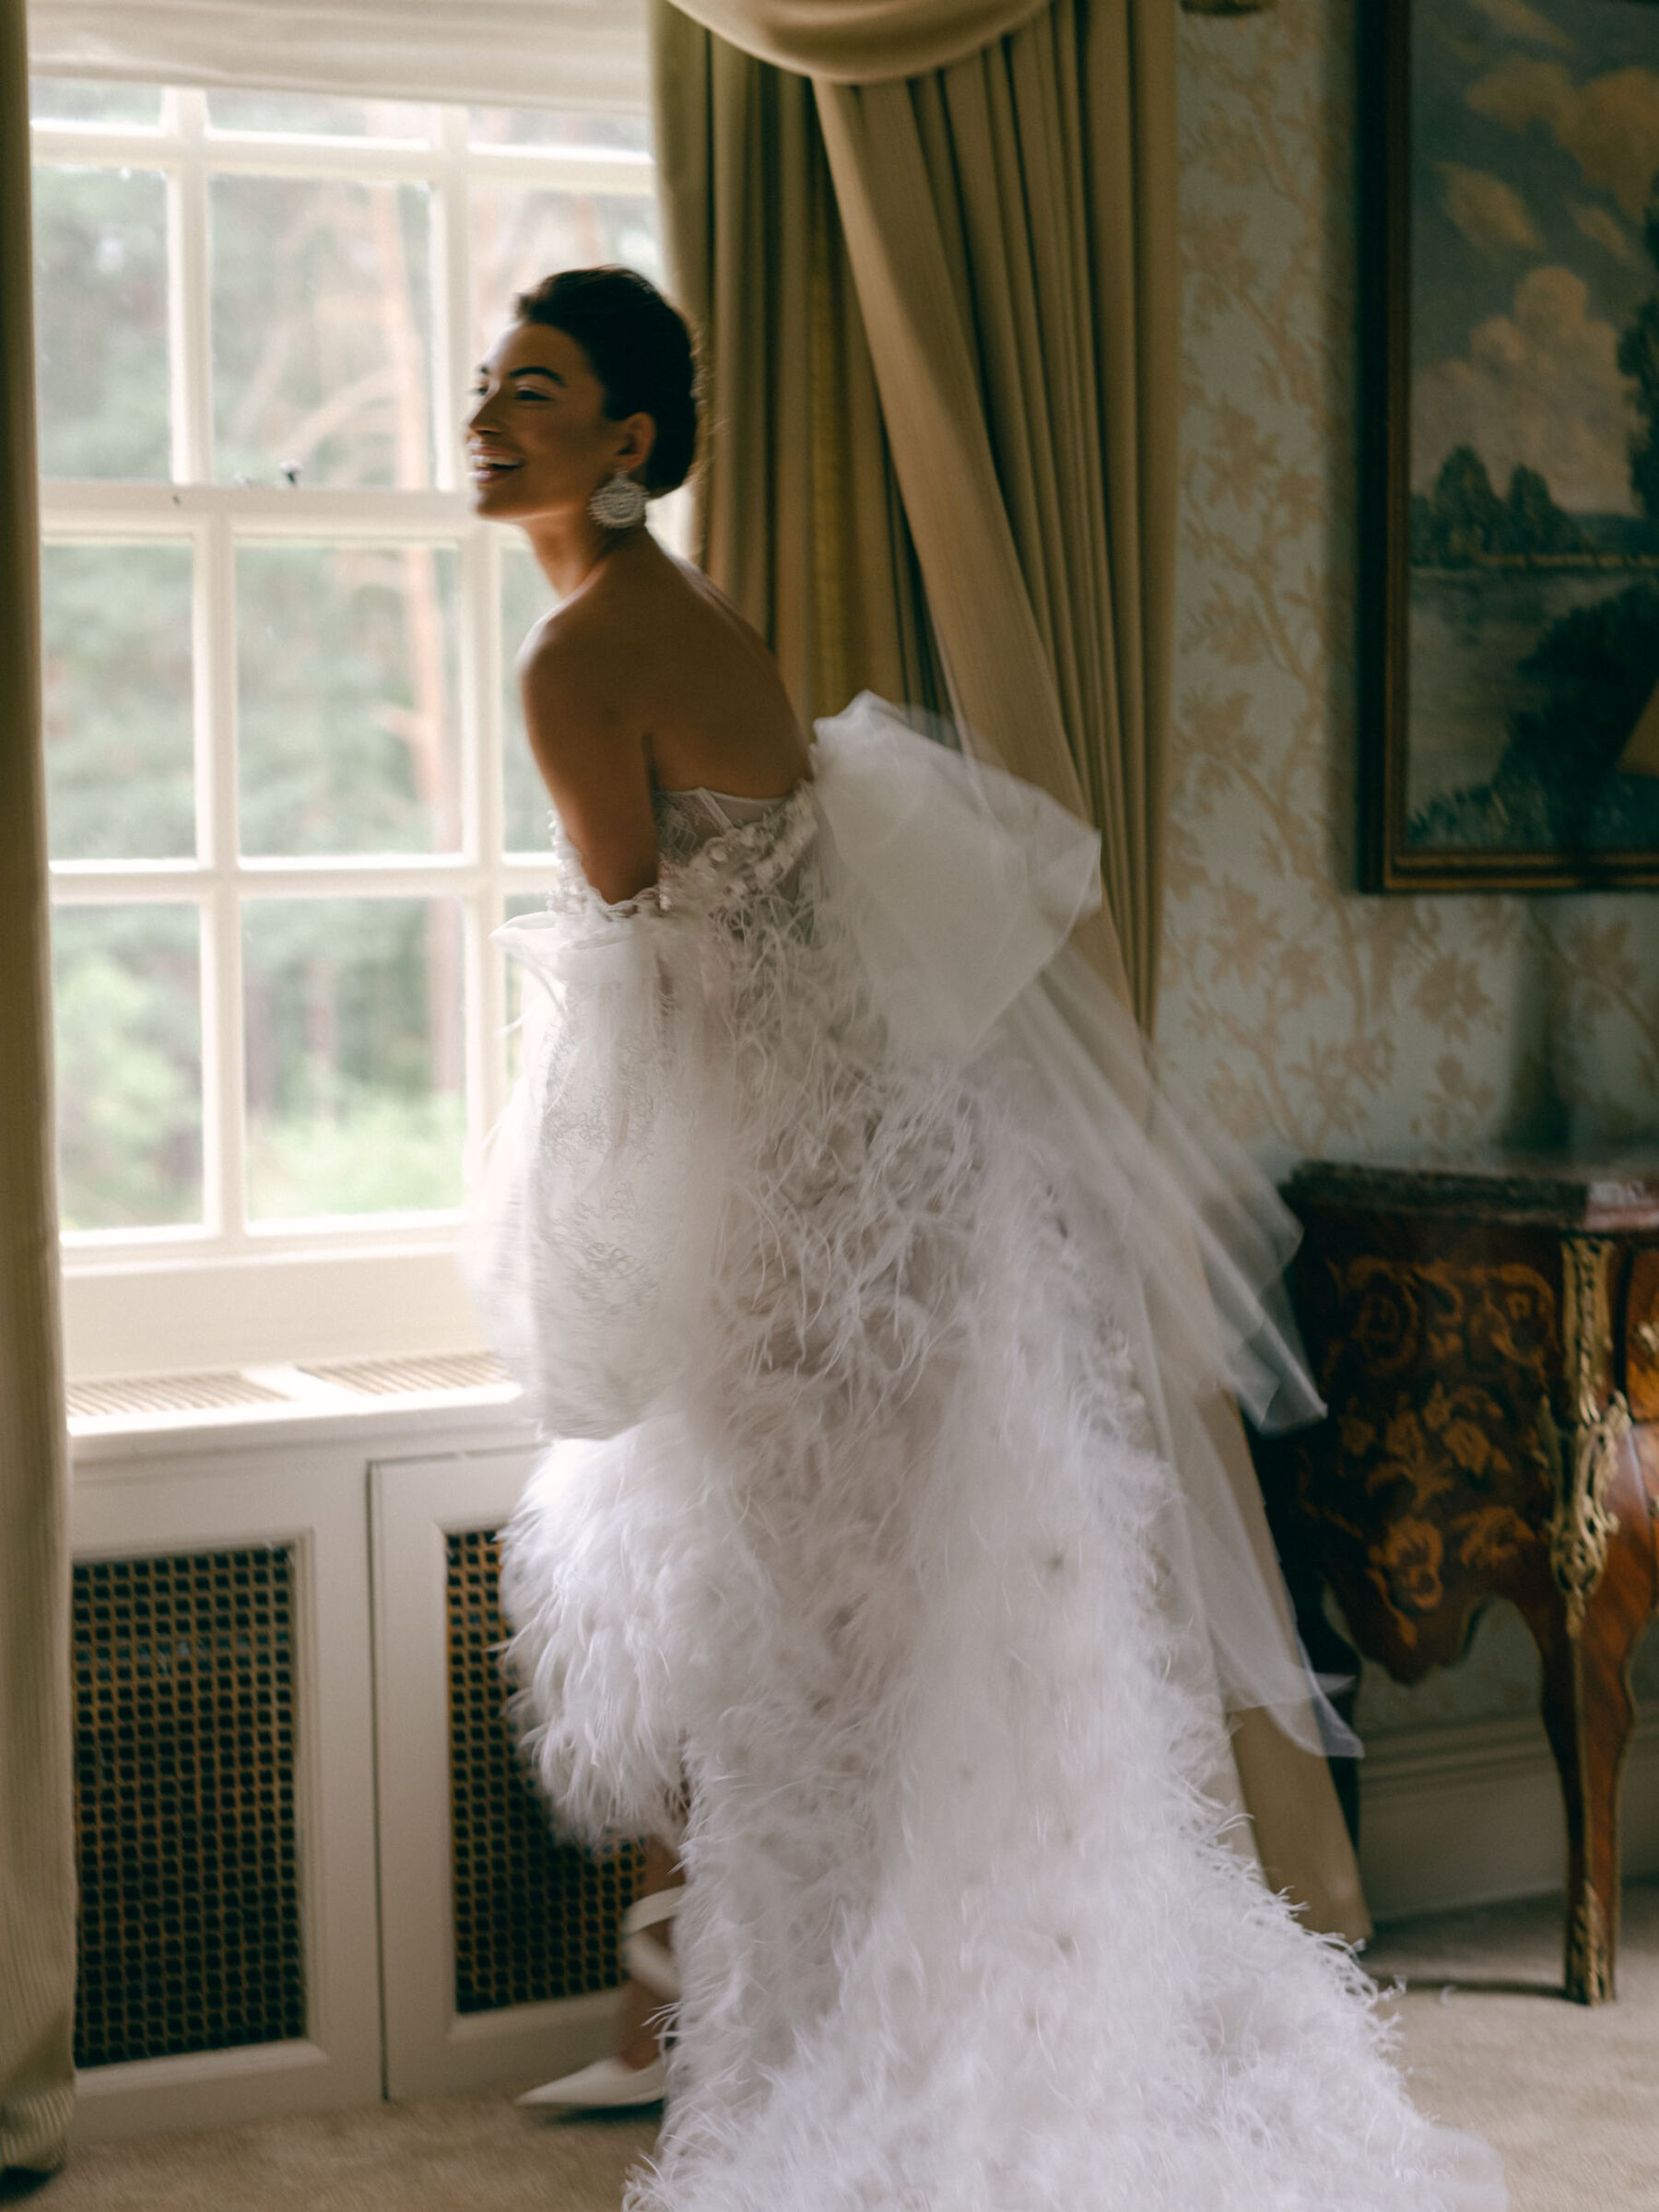 Sally Bean Couture wedding dress with ostrich feathers. Bridal muse by Katie Julia Photography.